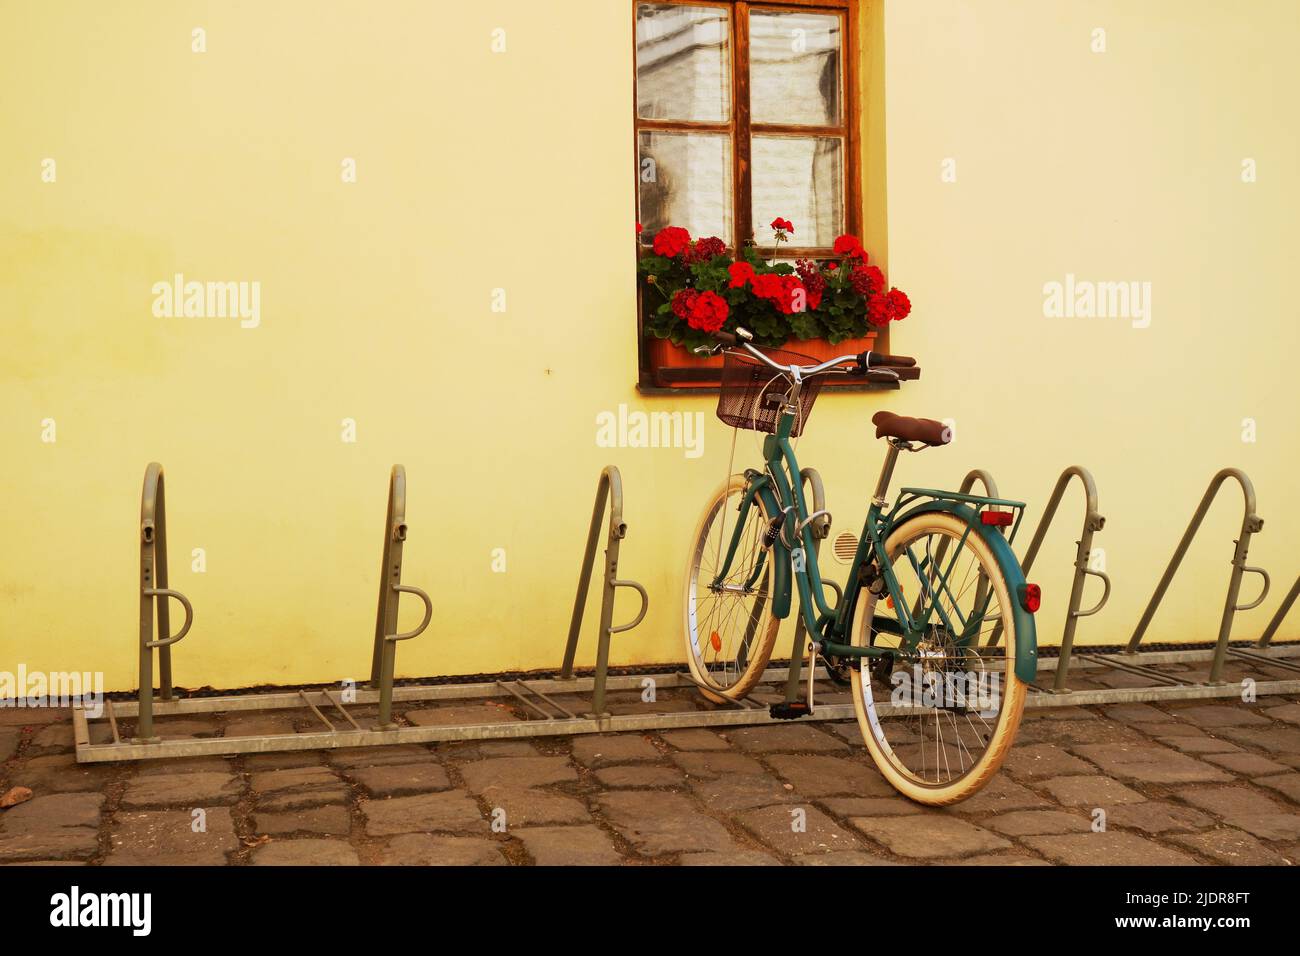 green bicycle parked by a window with red flowers Stock Photo